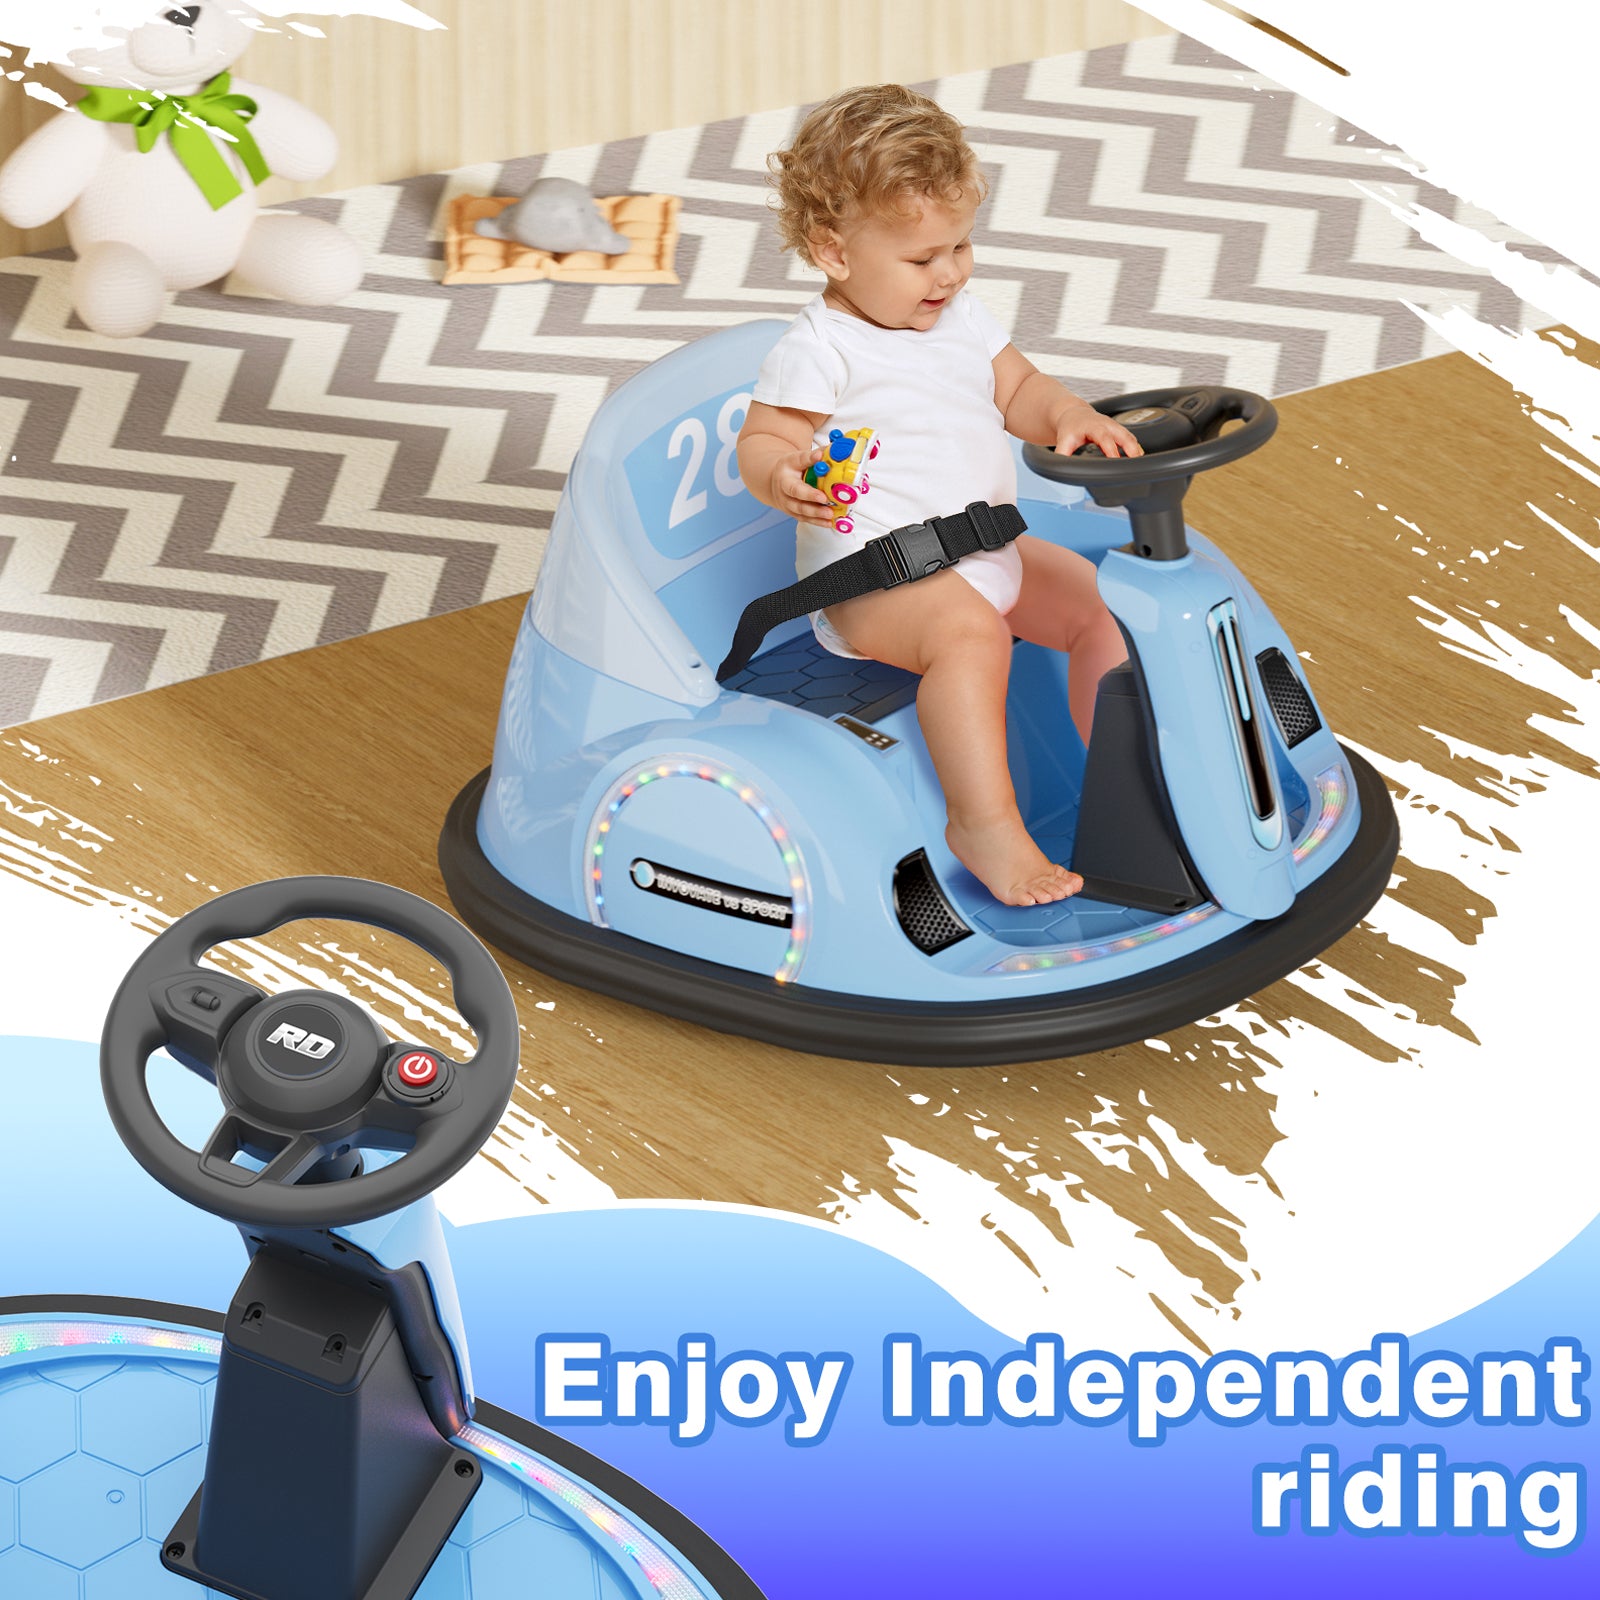 6V Electric Ride on Bumper Car Toys for Kids Toddlers 2-4 Years Old, 360° Spinning Bumping Toy Gifts Cars, Music Play, Lights, 0-2 mph, Blue